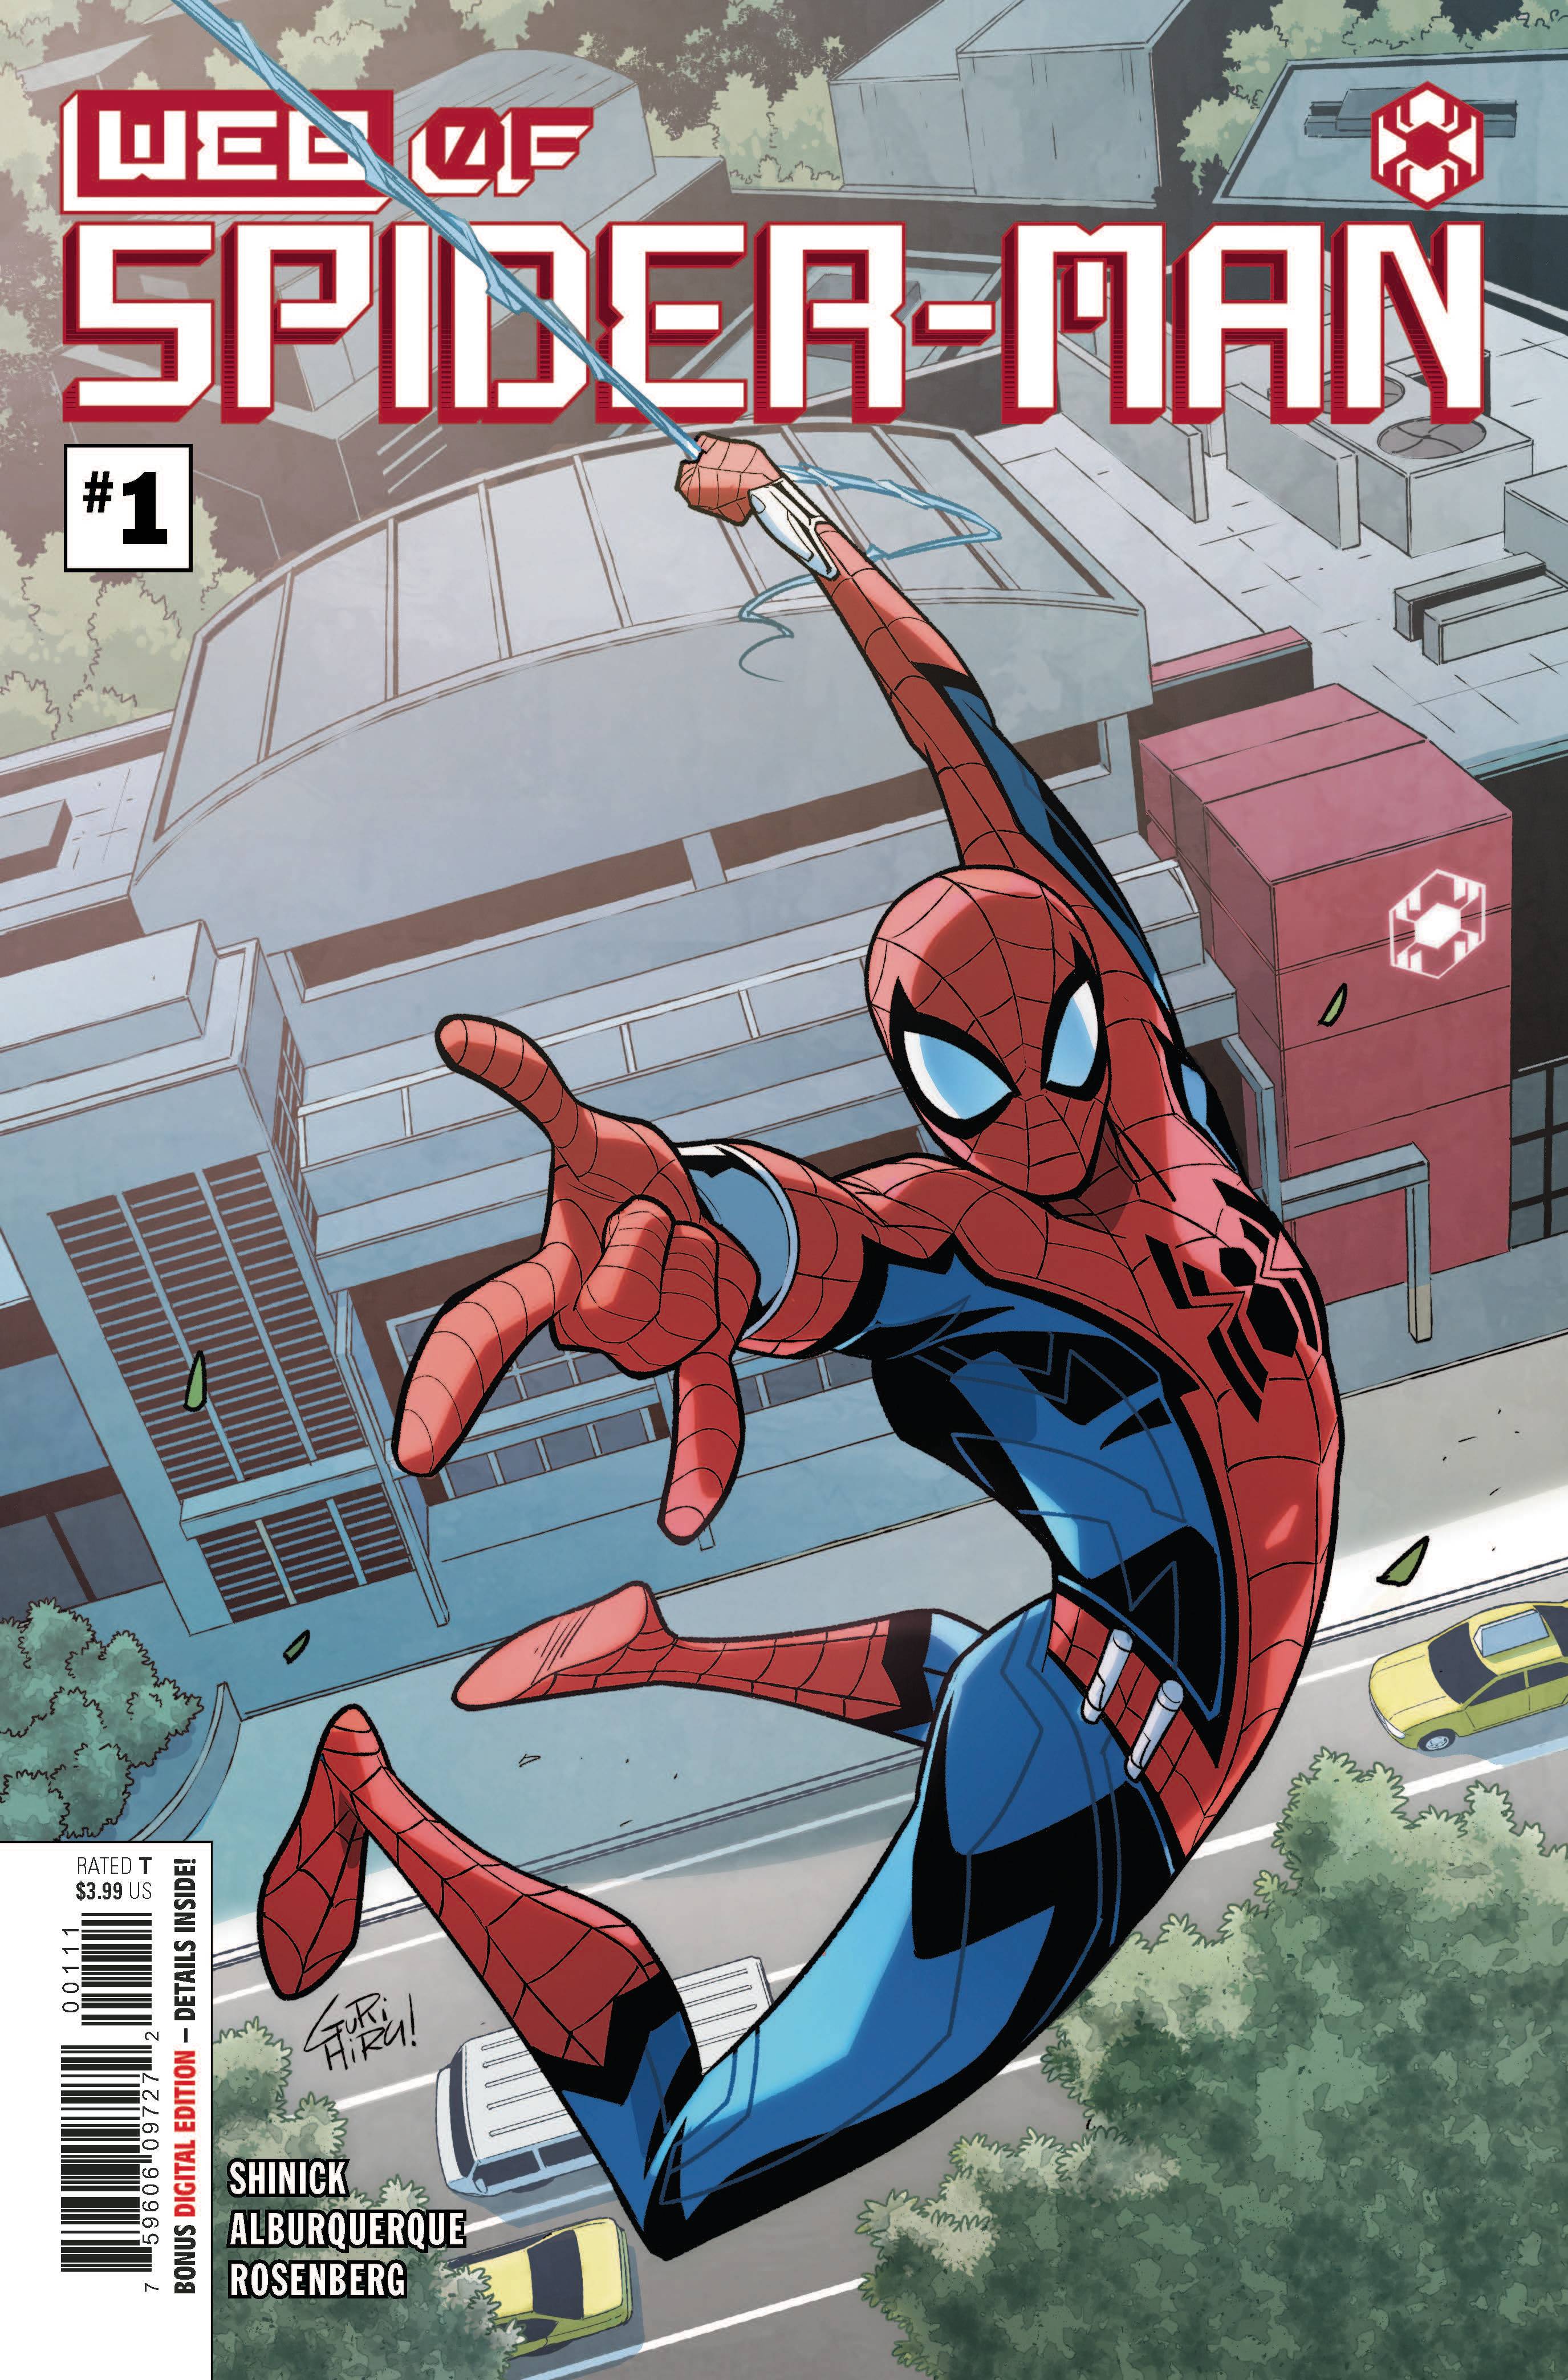 WEB OF SPIDER-MAN #1 (OF 5)